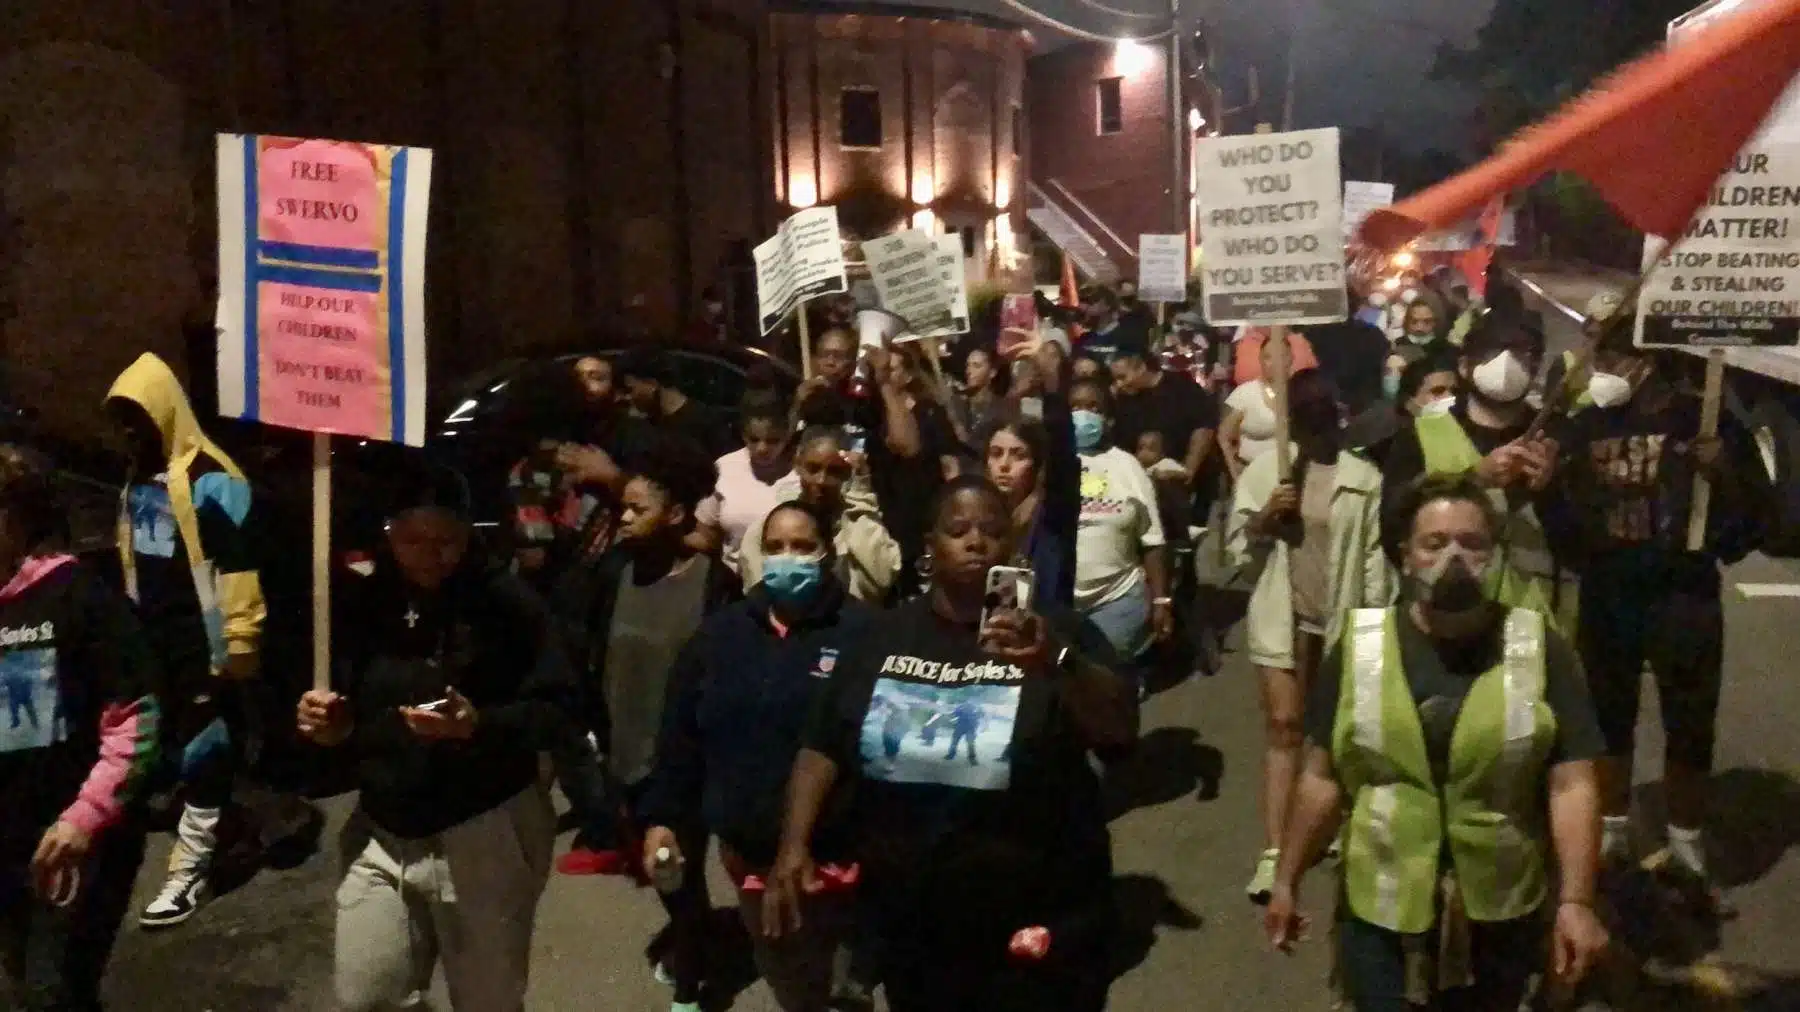 Families march against police violence – “Stop beating our children!”